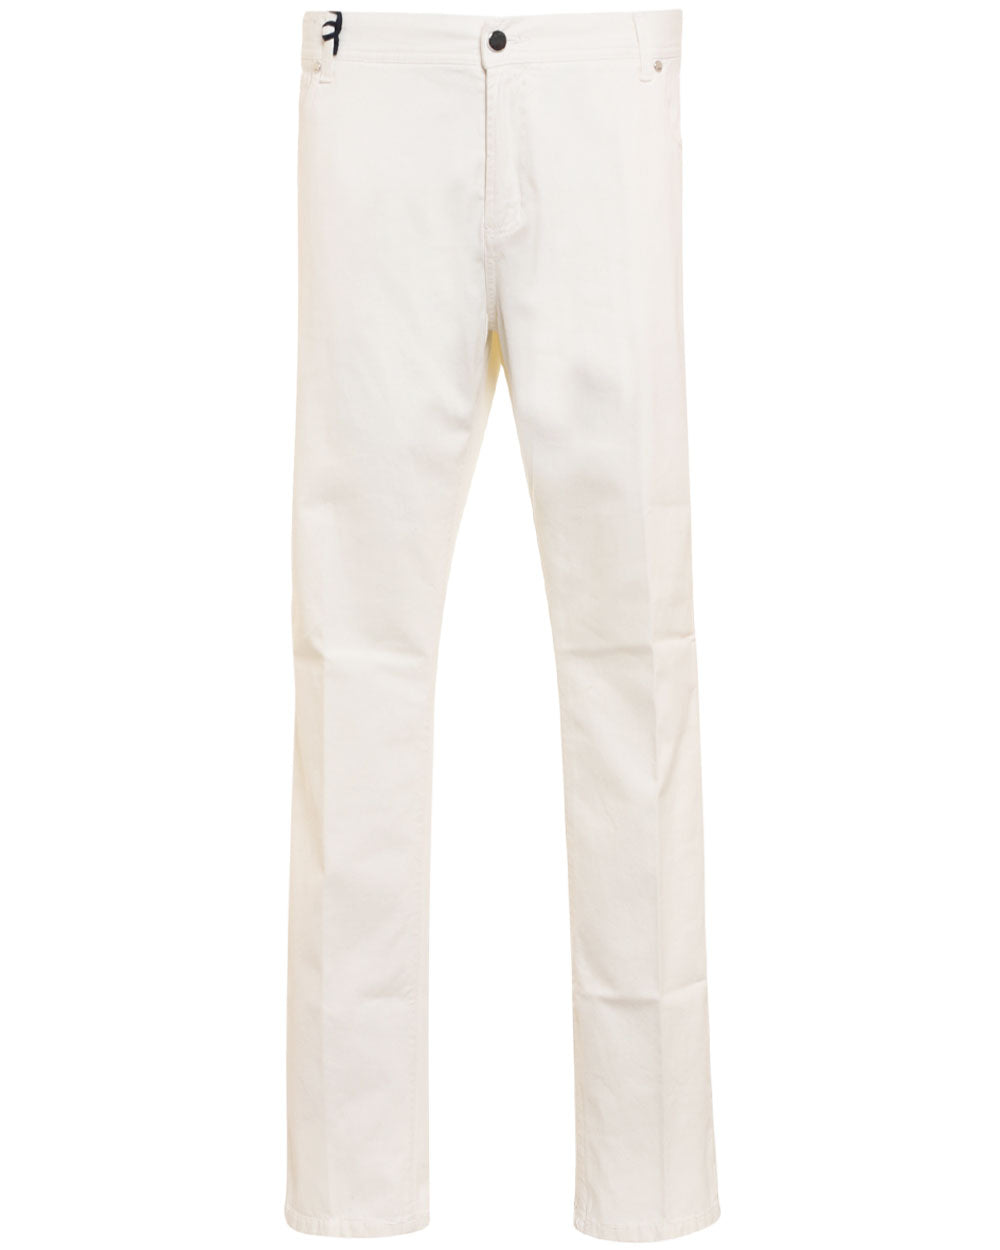 Off White Cotton Blend Casual Pant